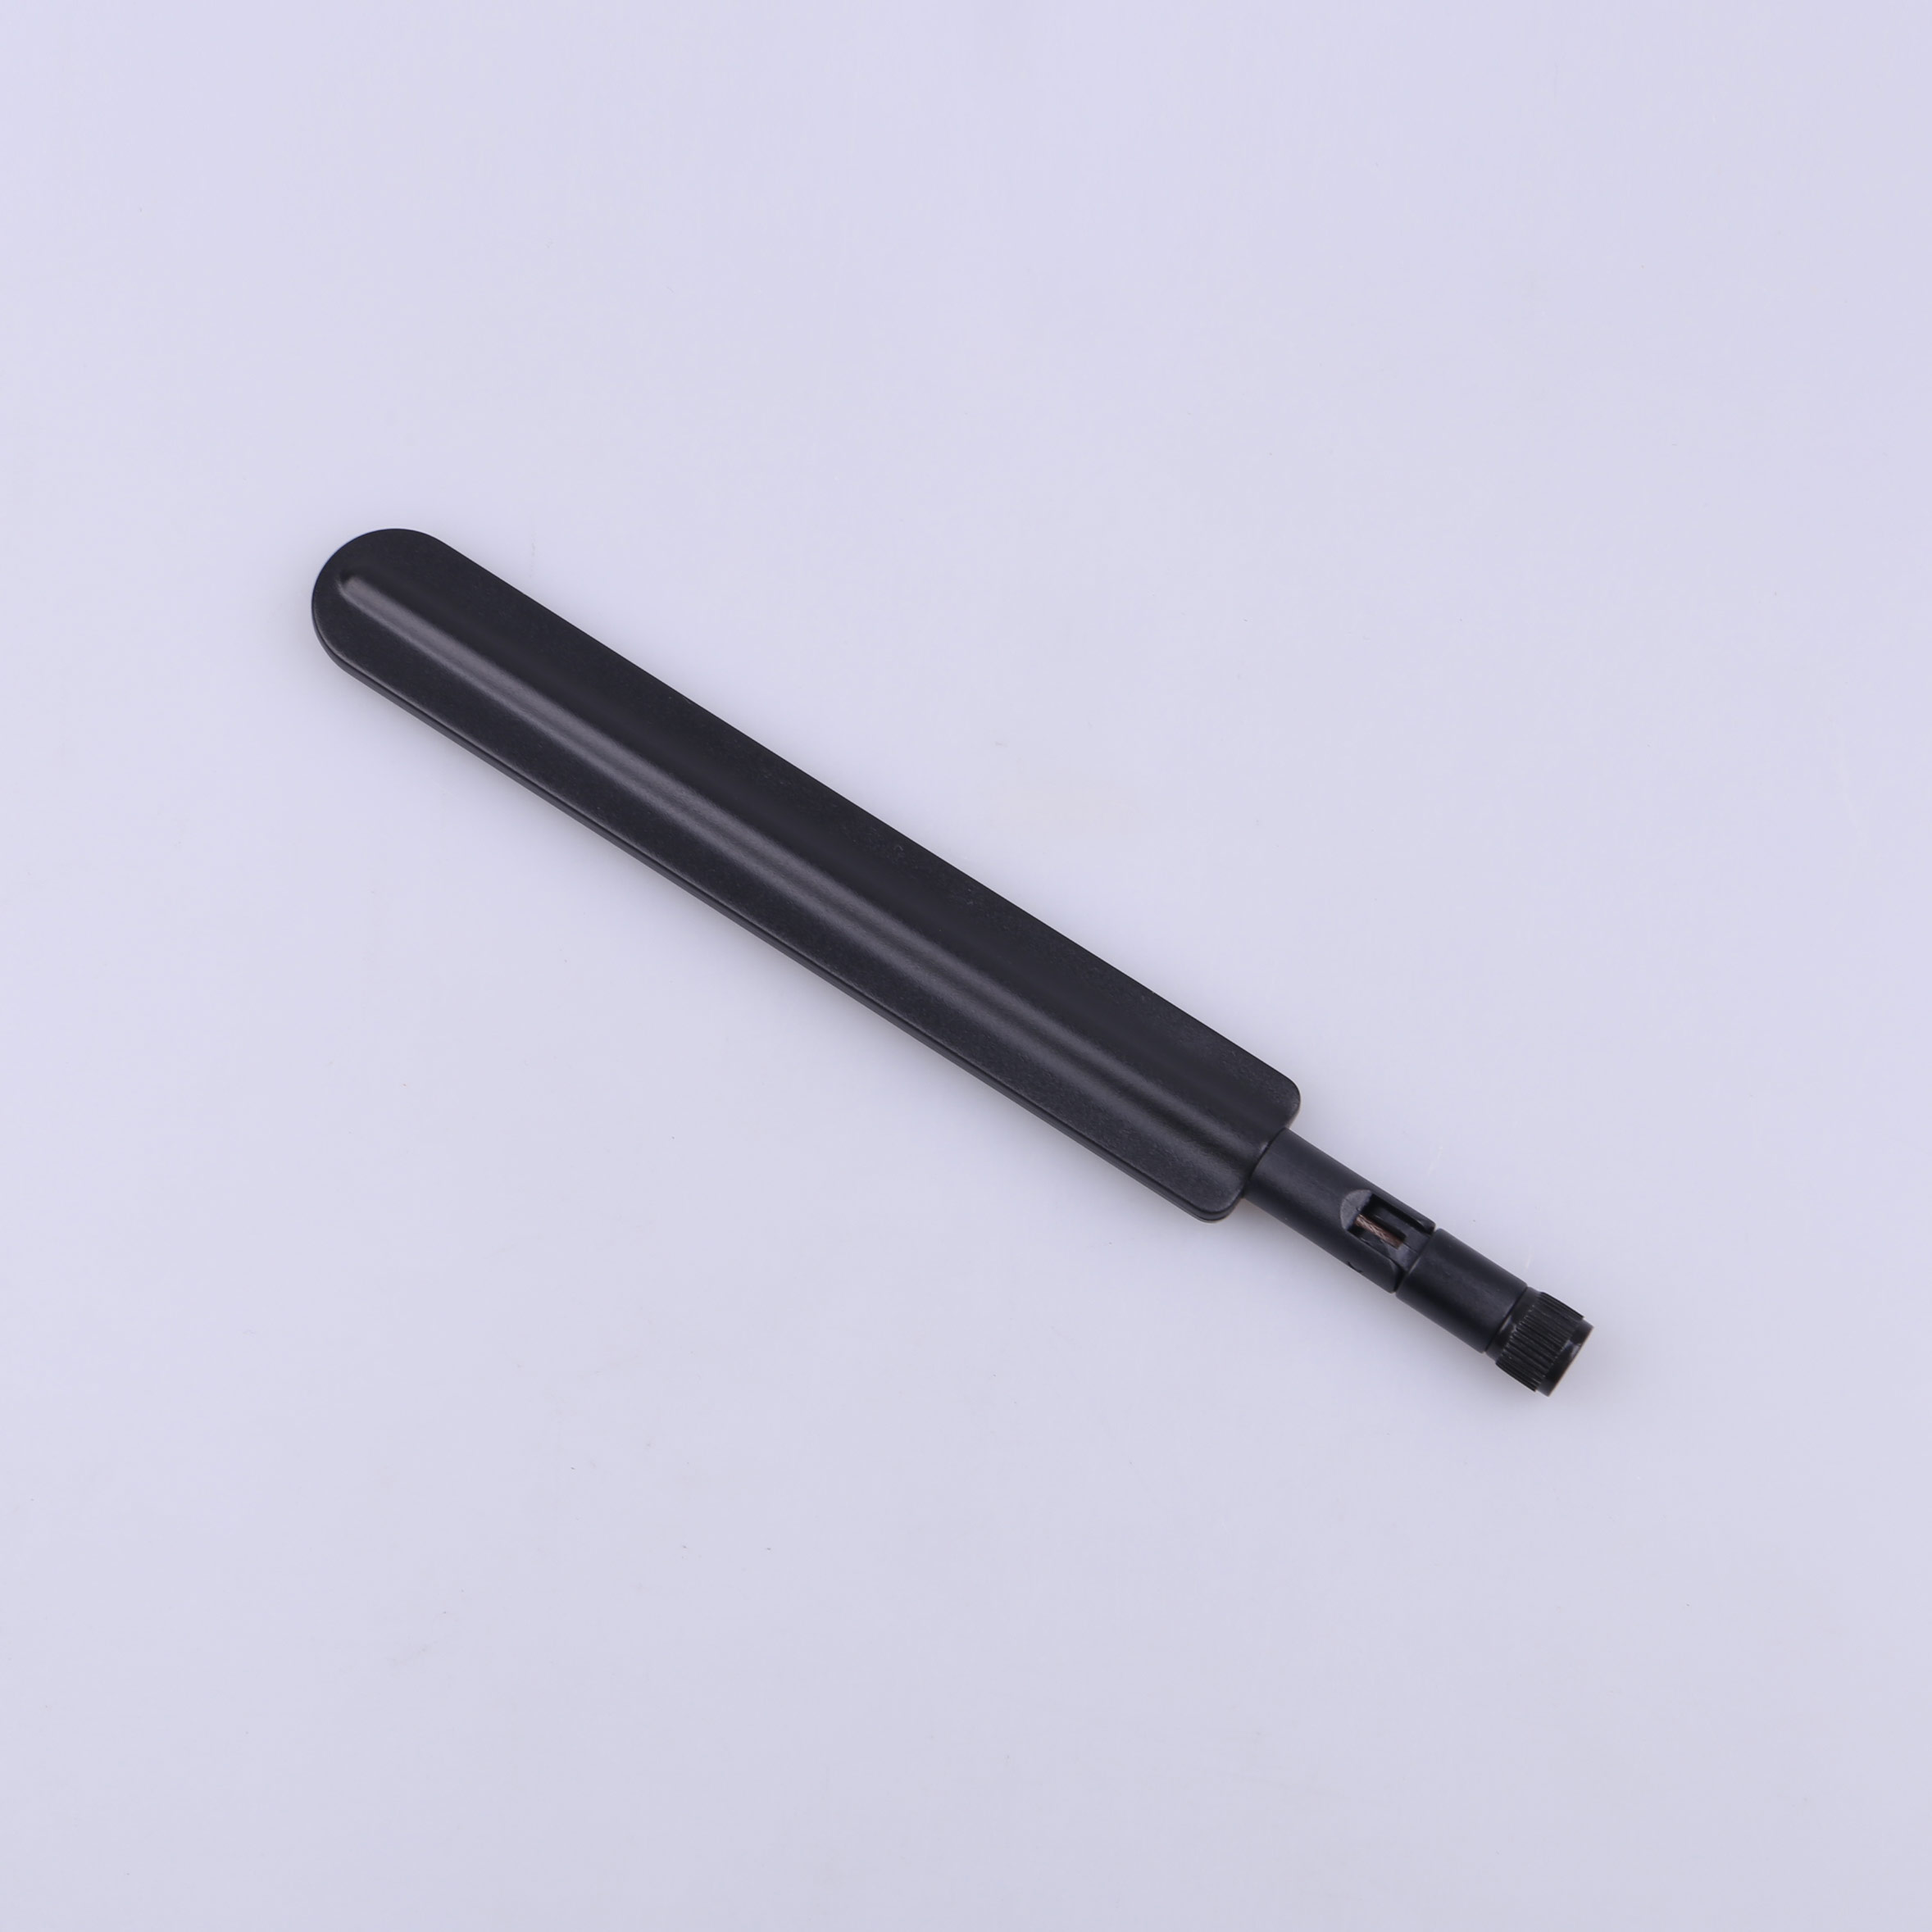 Kinghelm WiFi Antenna 5G Paddle Shaped Rubber Rod Antenna Supports 2G3G4GSMA  — KH-5G-SMAJ-131mm